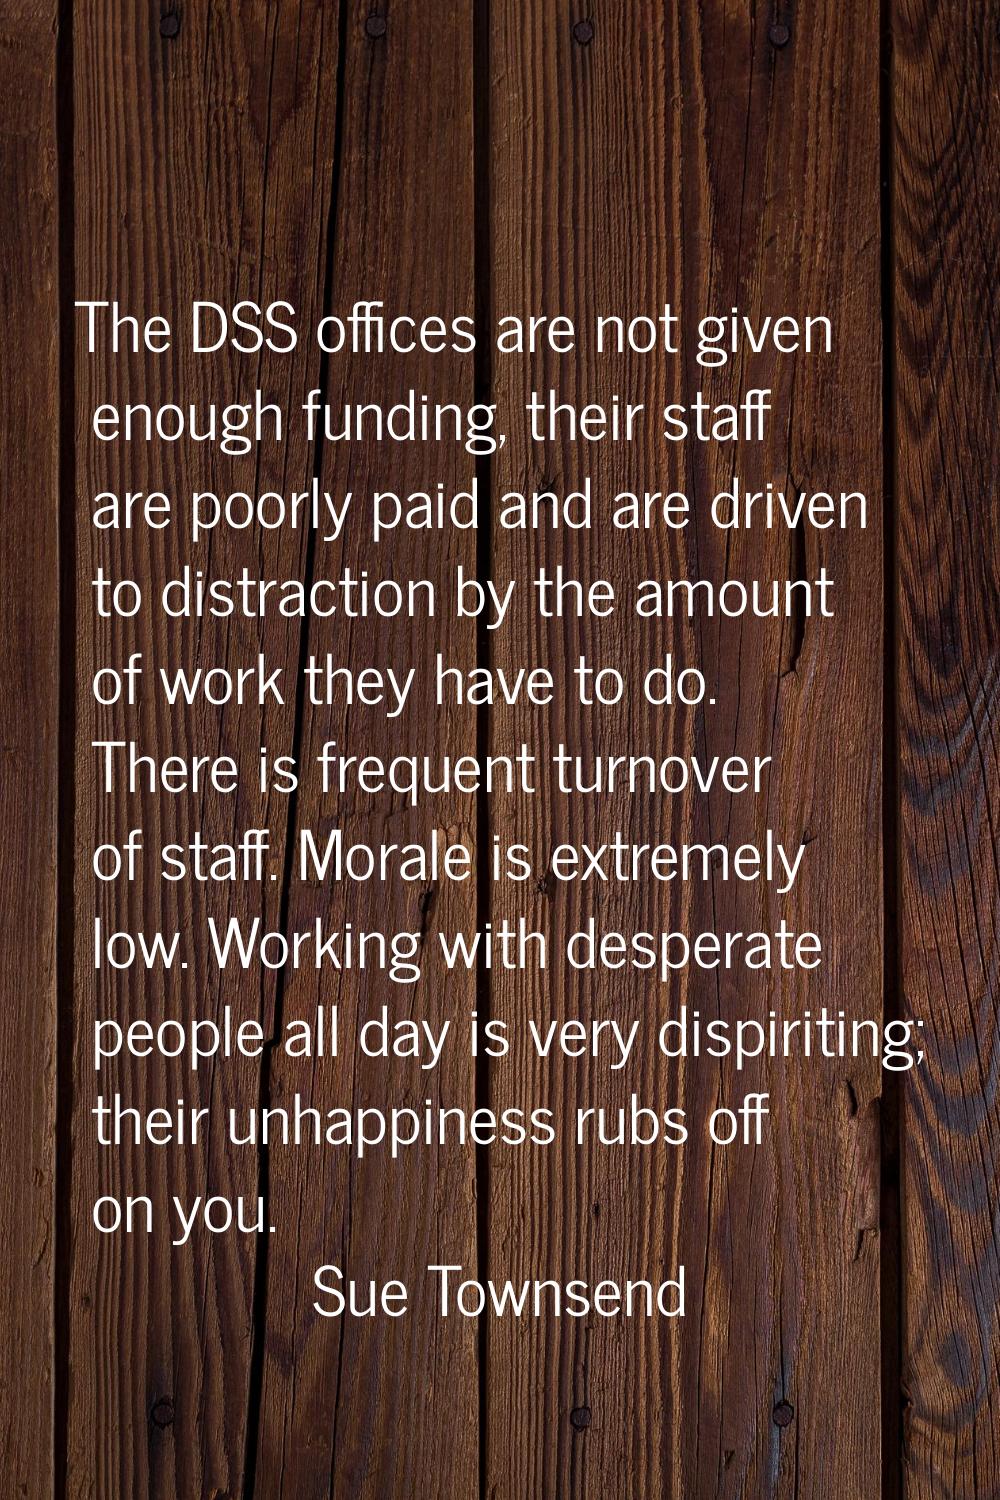 The DSS offices are not given enough funding, their staff are poorly paid and are driven to distrac